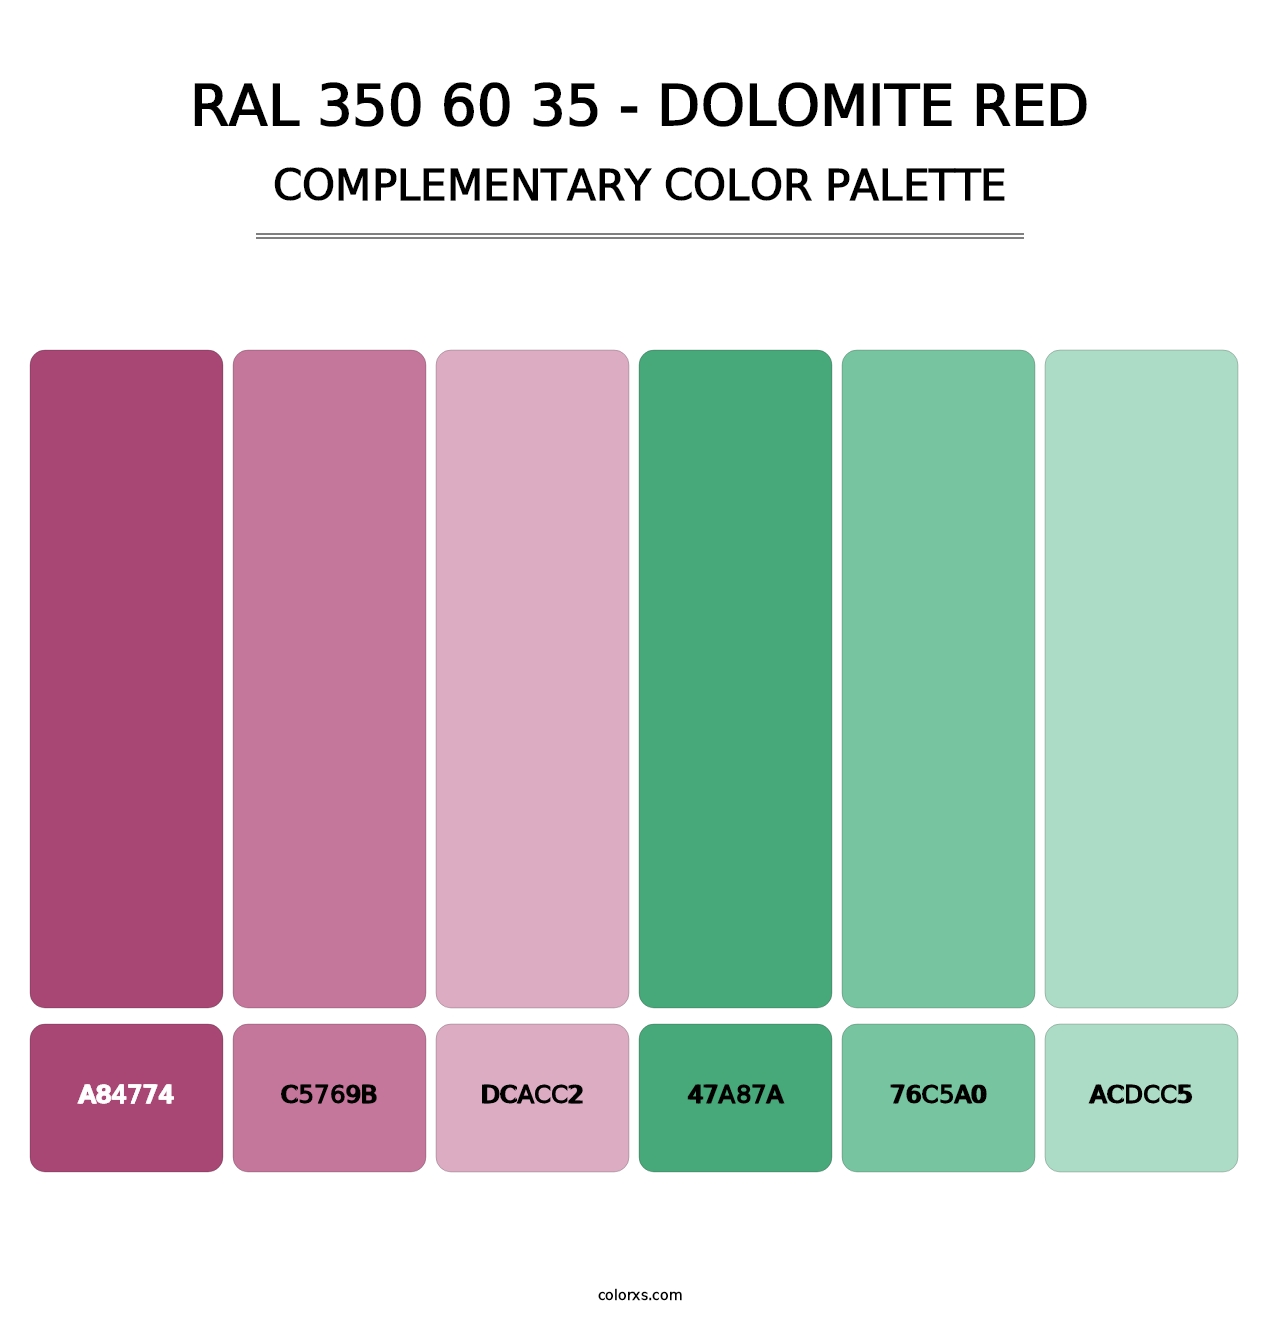 RAL 350 60 35 - Dolomite Red - Complementary Color Palette